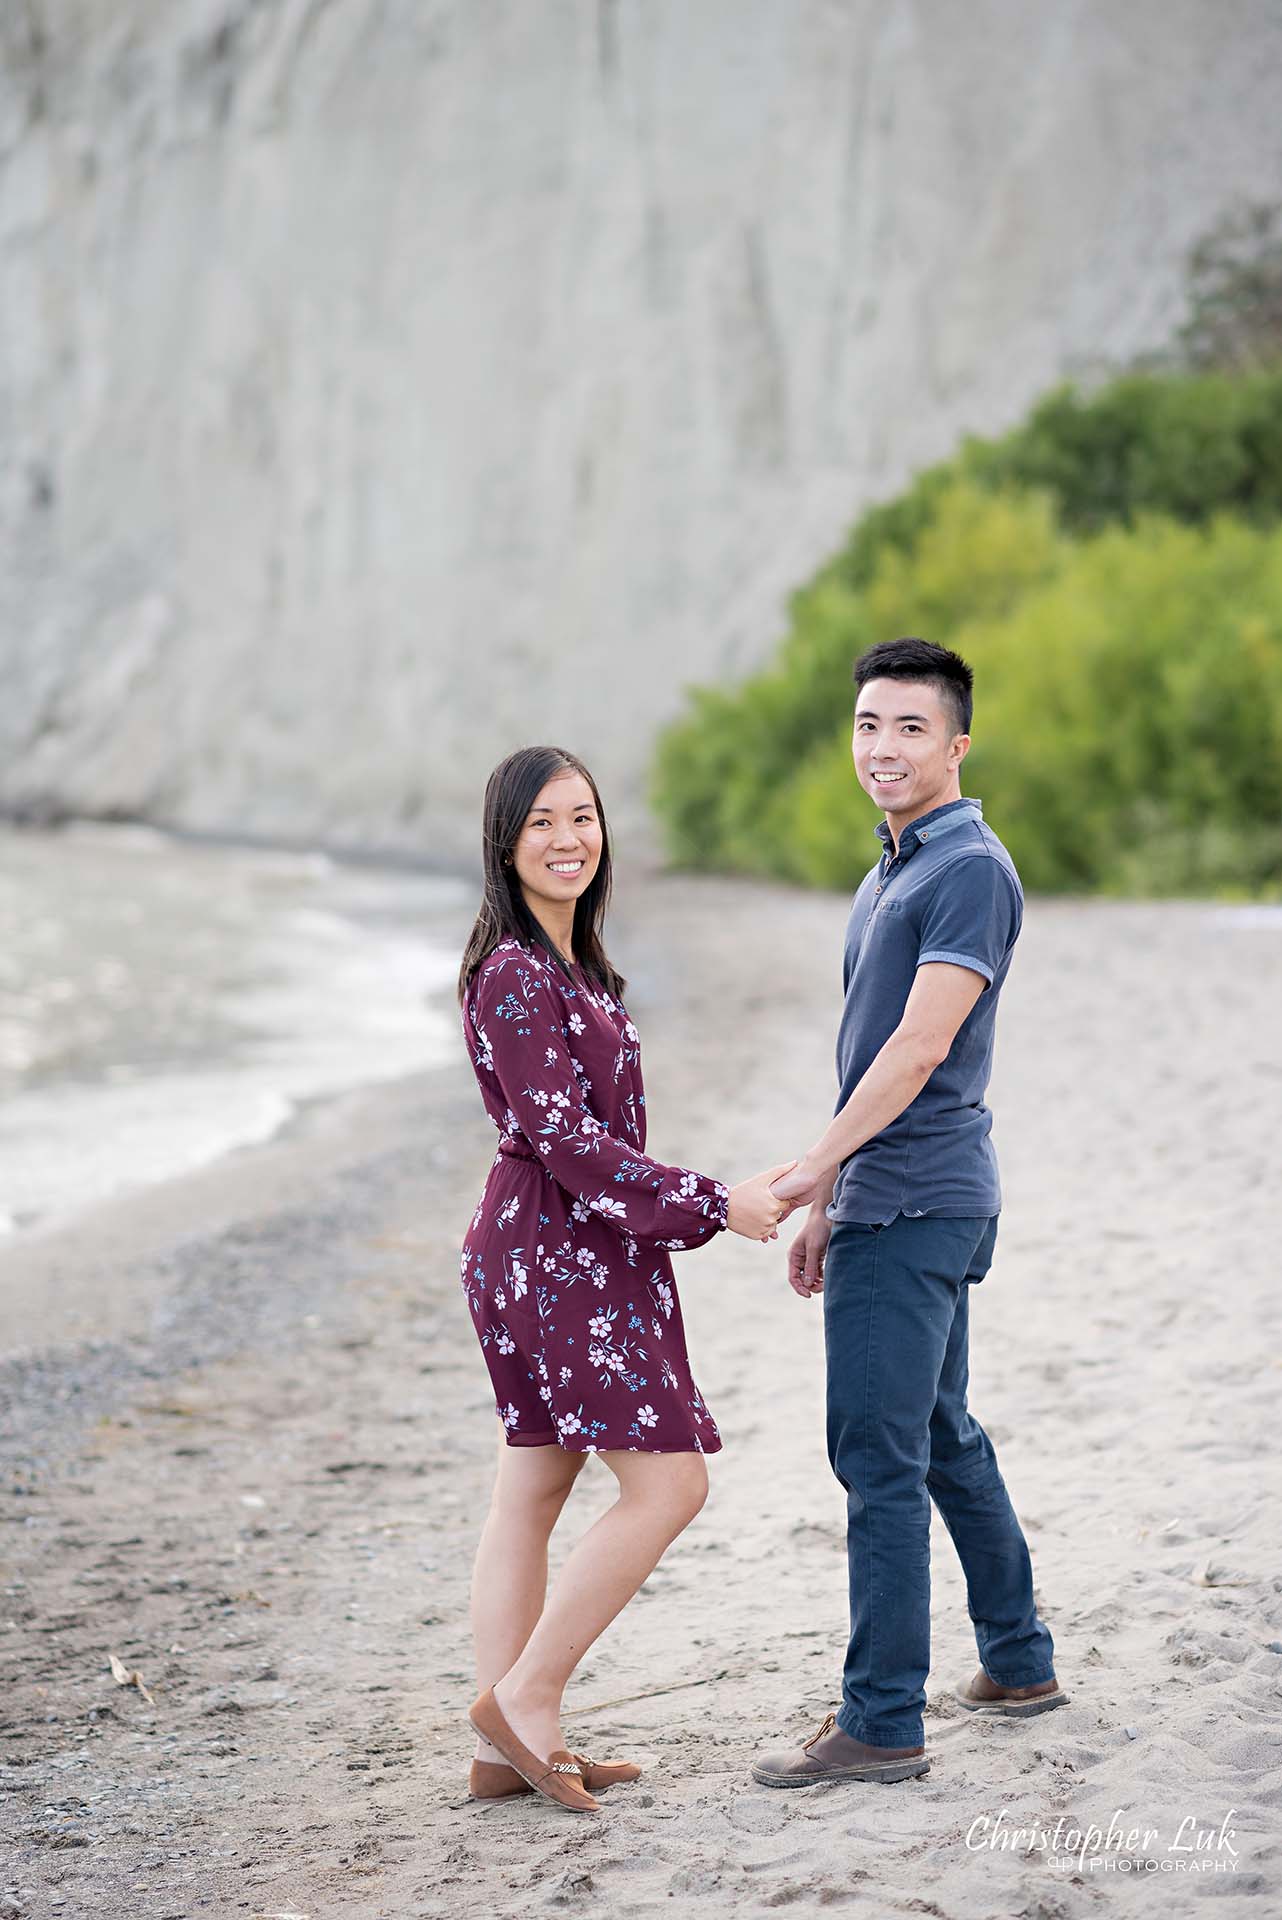 Christopher Luk Toronto Photographer Scarborough Bluffs Beach Park Sunset Surprise Wedding Marriage Engagement Proposal Candid Natural Photojournalistic Bride Groom Waterfront Water Lake Ontario Background Beachfront Sand Walking Together Holding Hands Edge of Water Smile Back at Camera Portrait